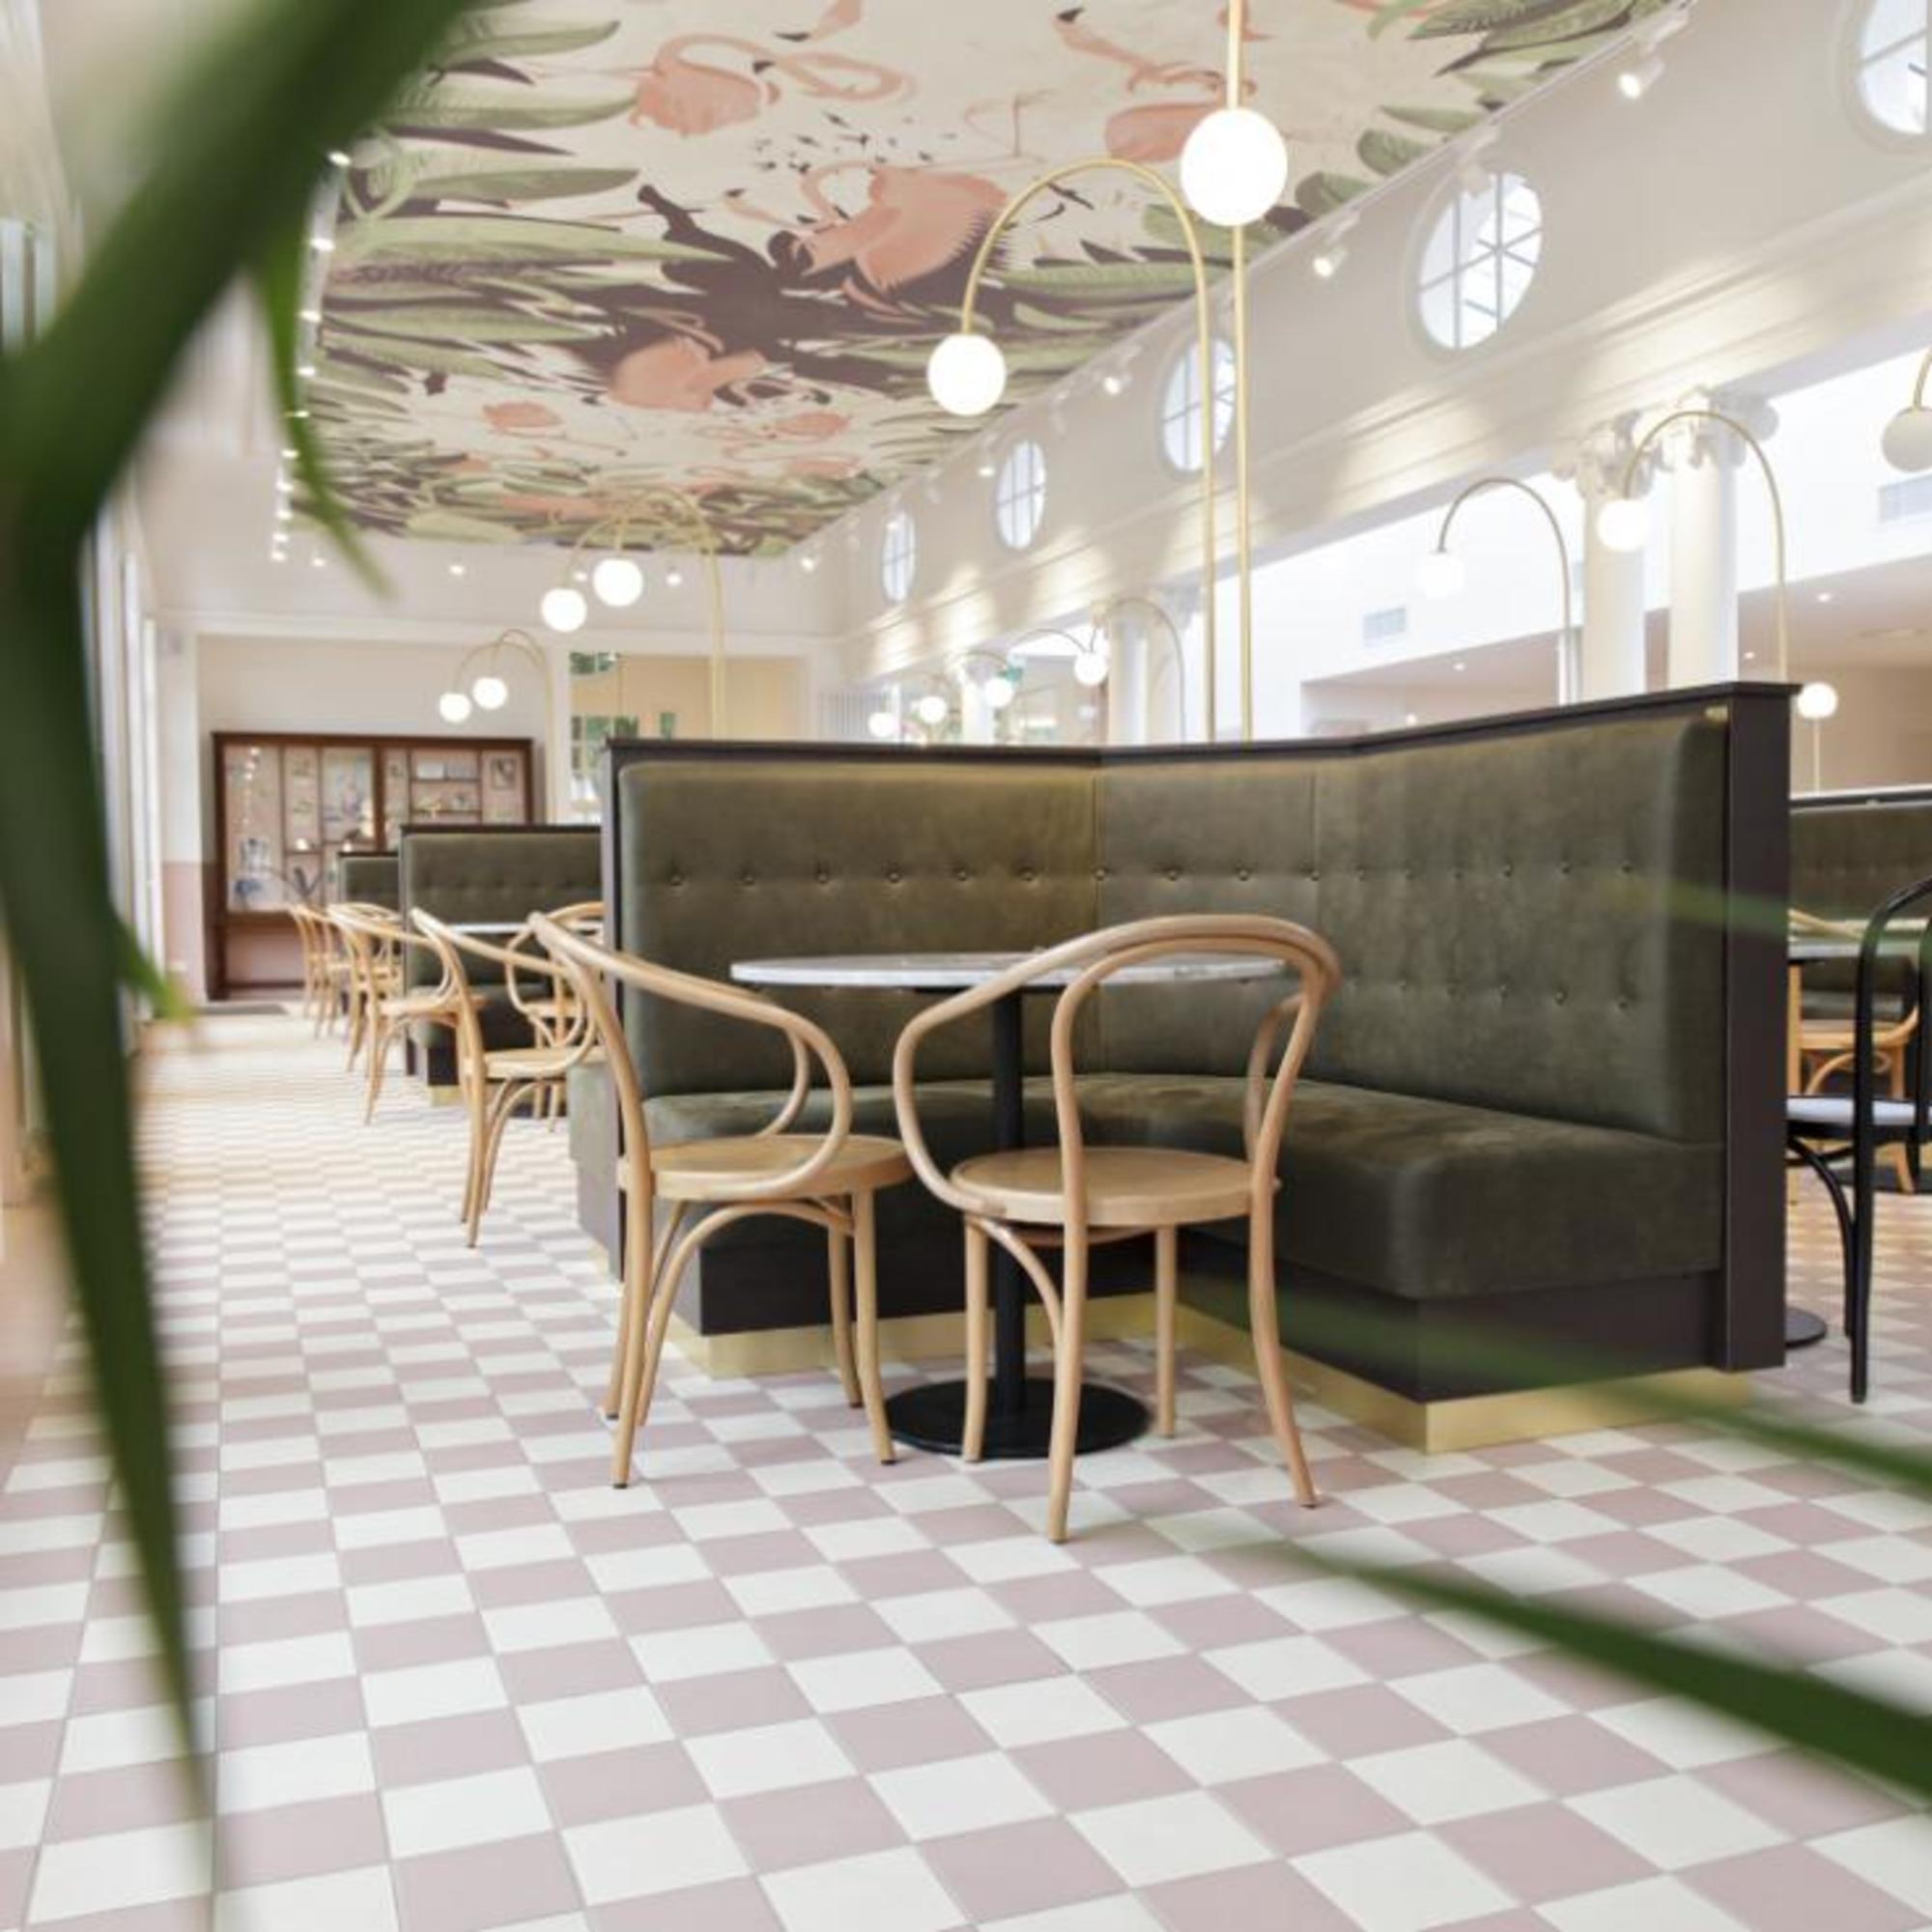 Flamingo Grandcafé zoo Anvers 8 Office architects TOPCER 15x15 6616 white + 6619 pink